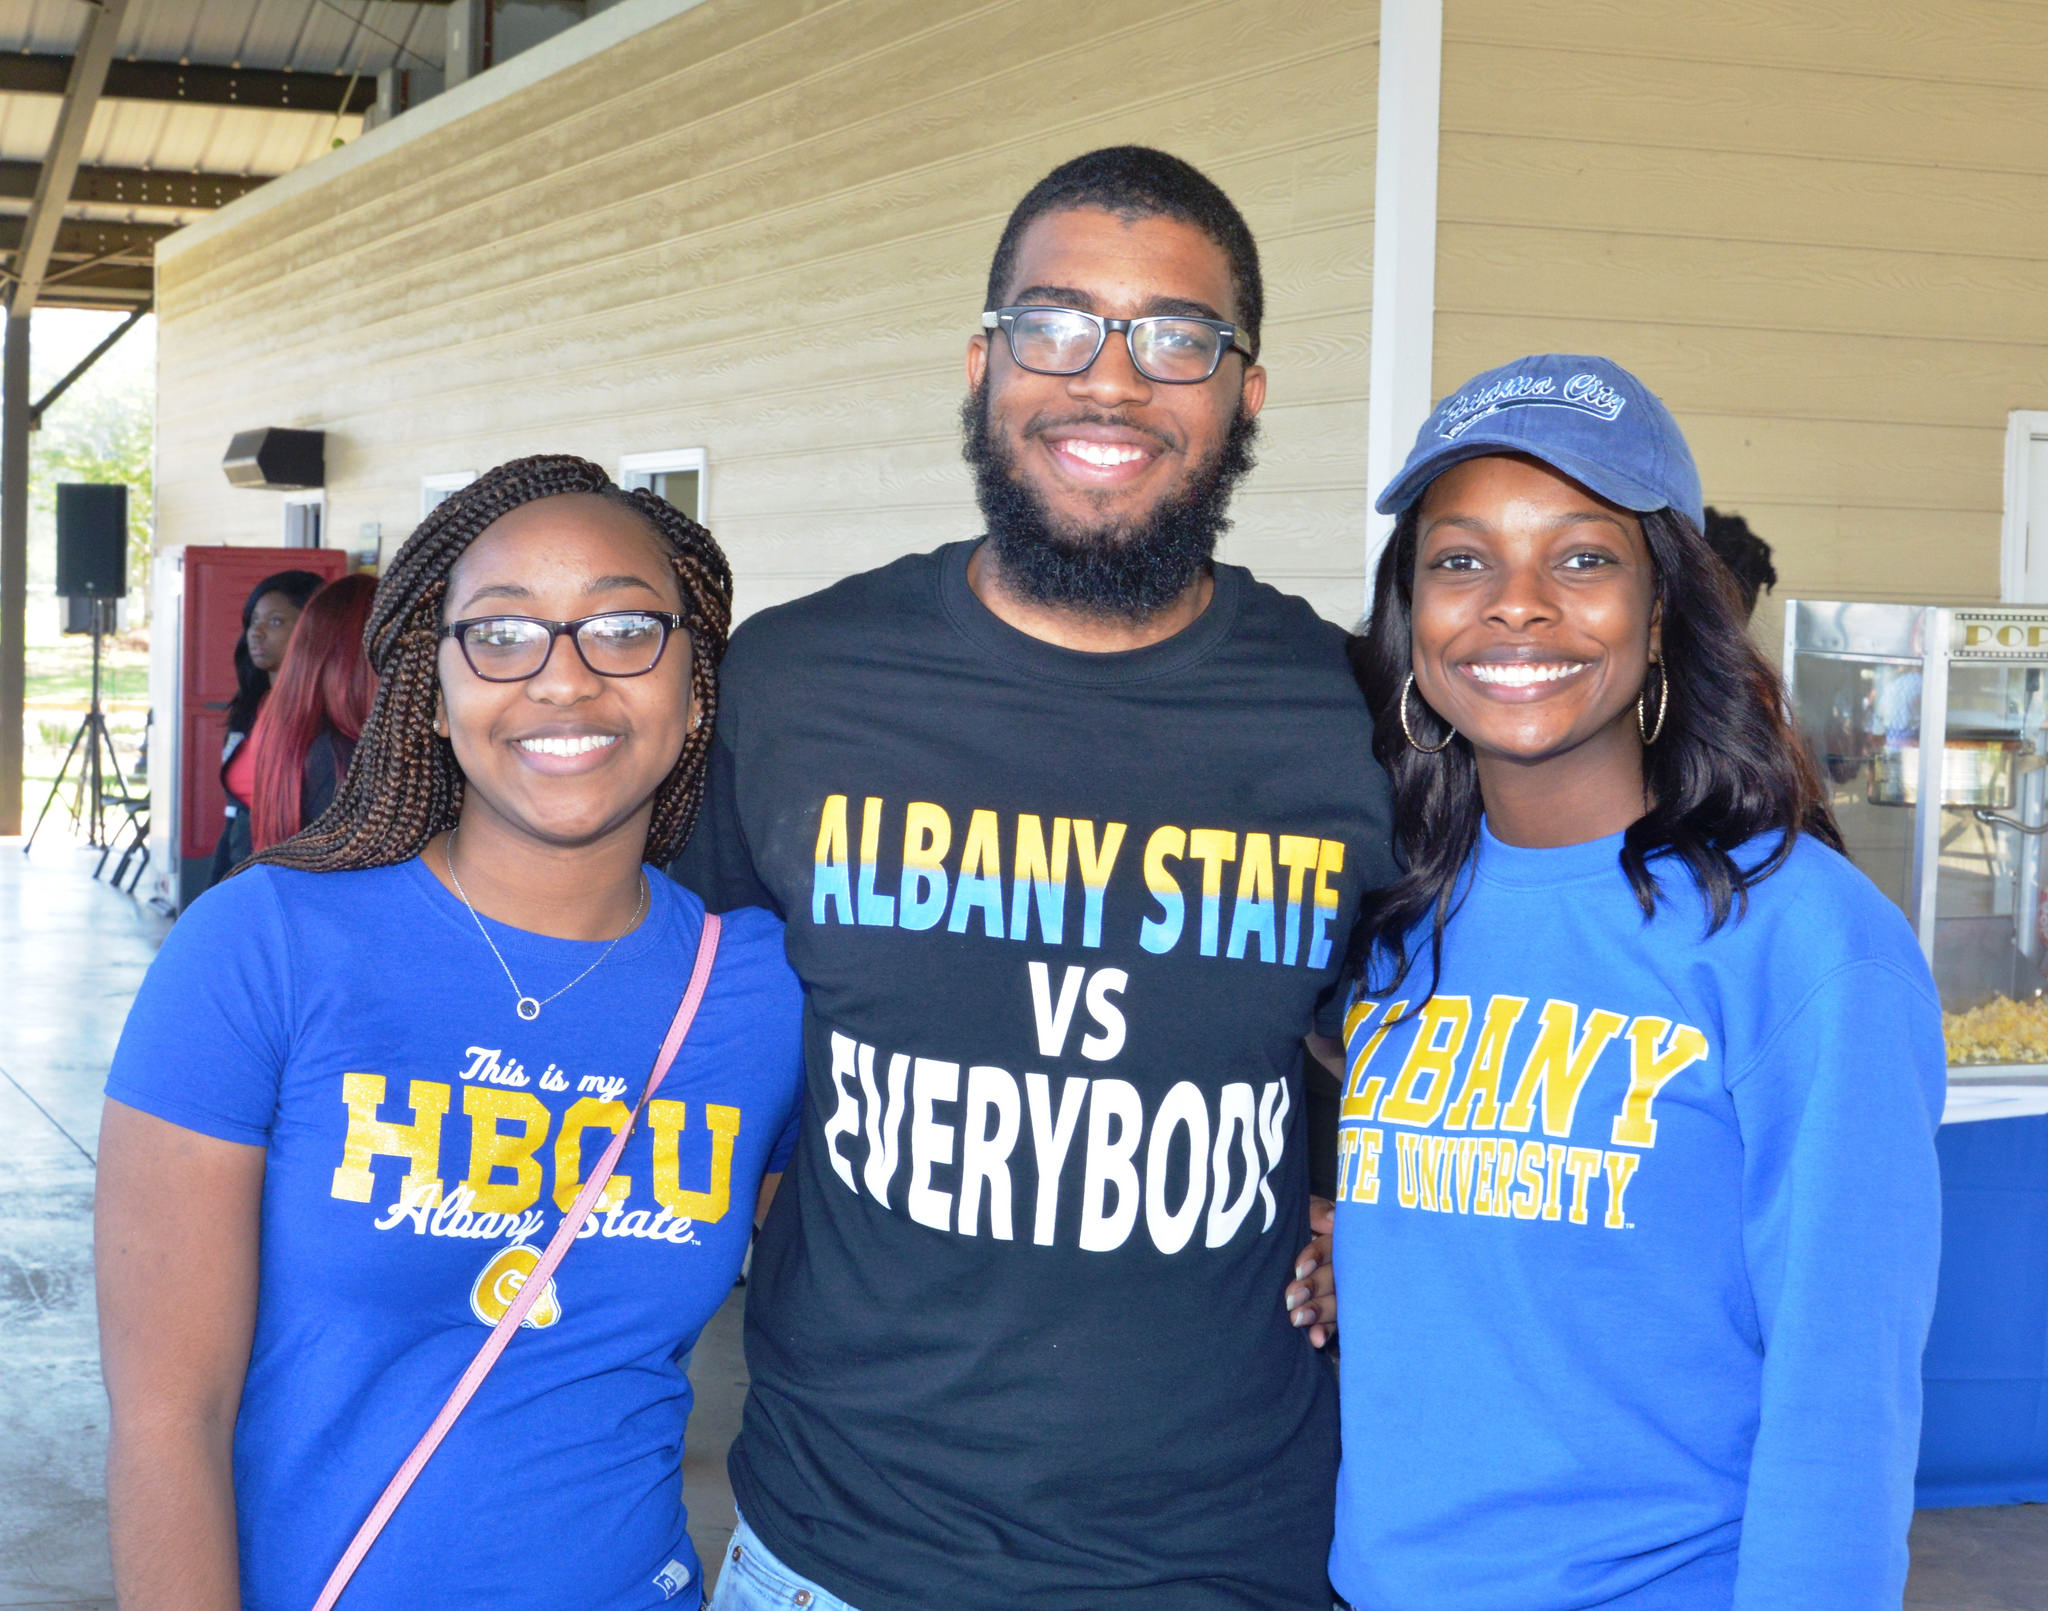 ASU students, faculty and staff enjoyed the Founder's Day cookout, which was held in celebration of the institution's legacy.